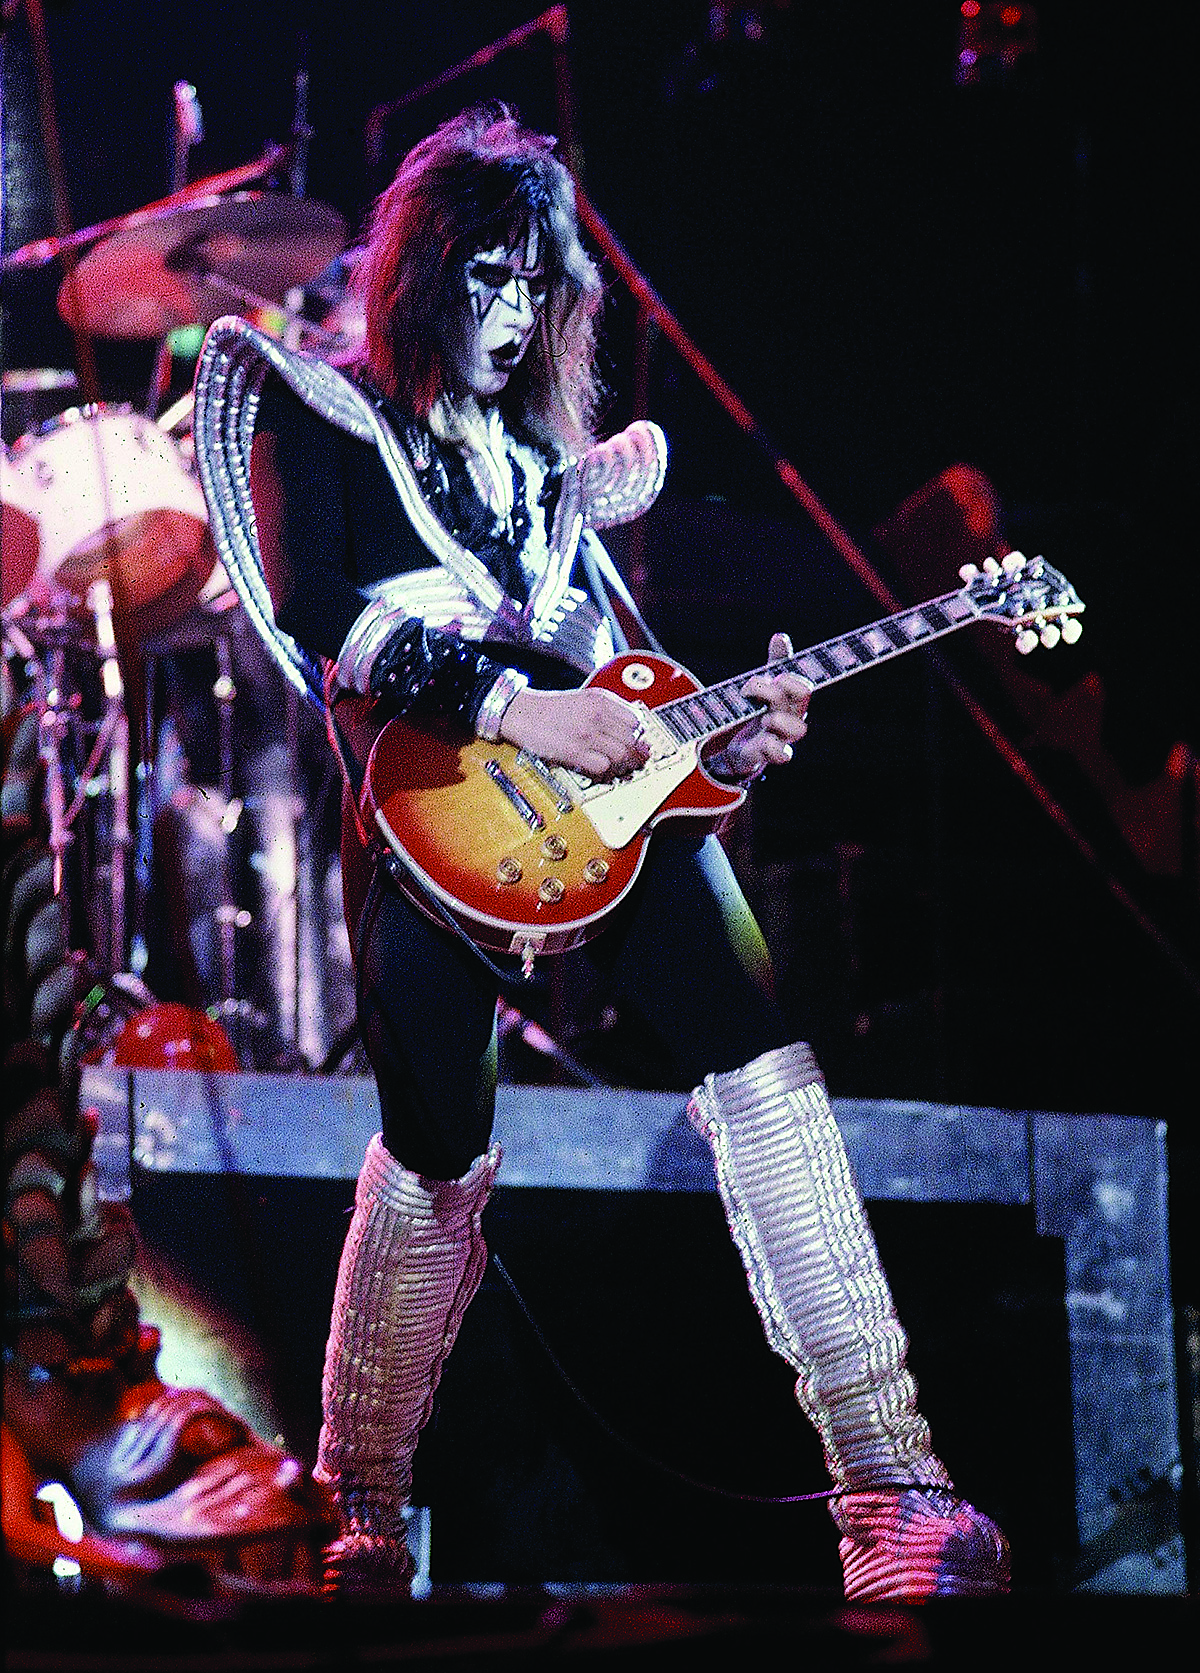 KISS' Ace Frehley is clean, sober, and back on the road - The Blade